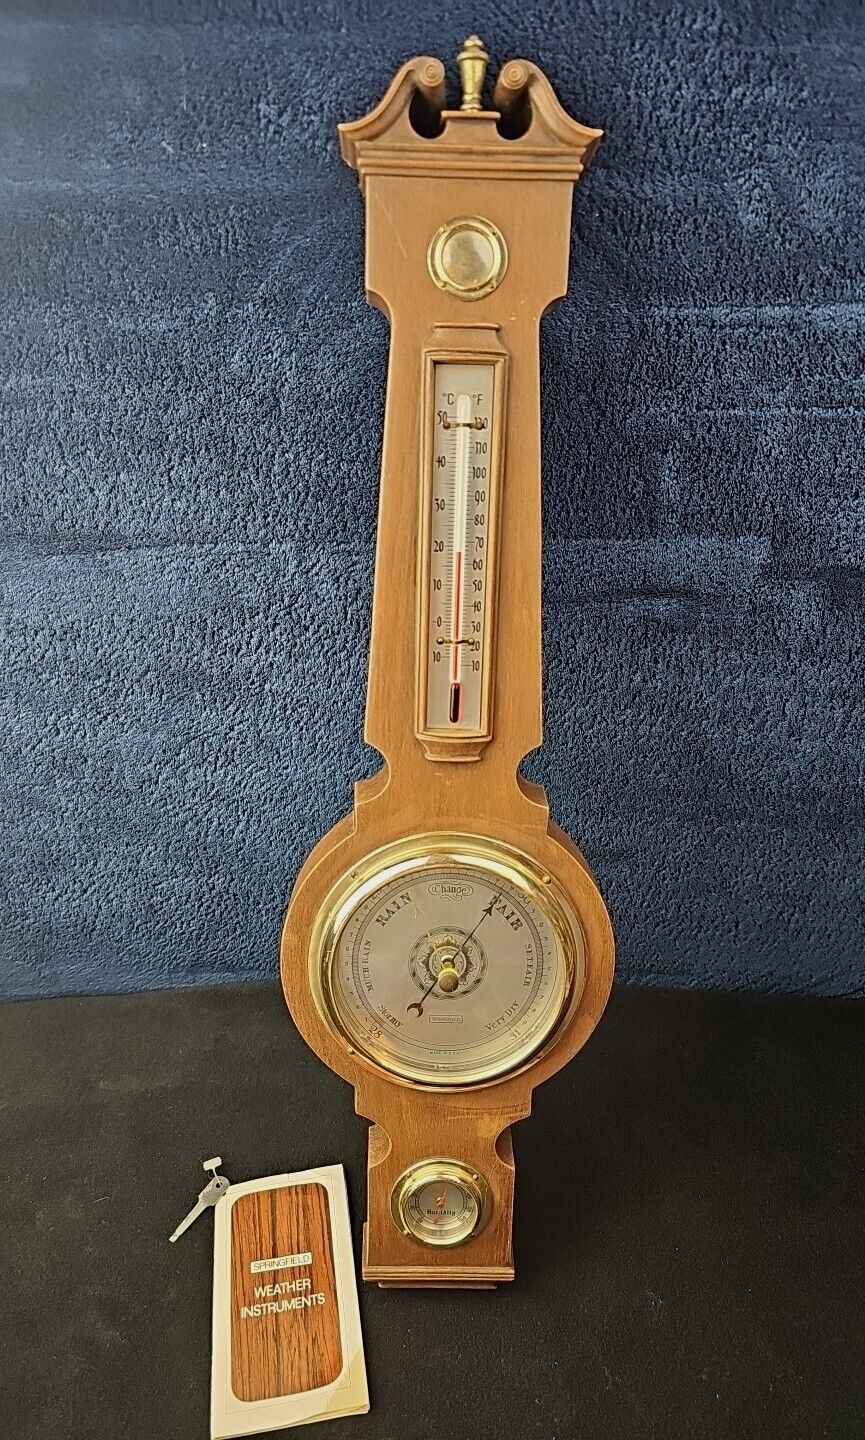 Vtg Springfield Instruments  Barometer Thermometer Humidity Weather Station Key